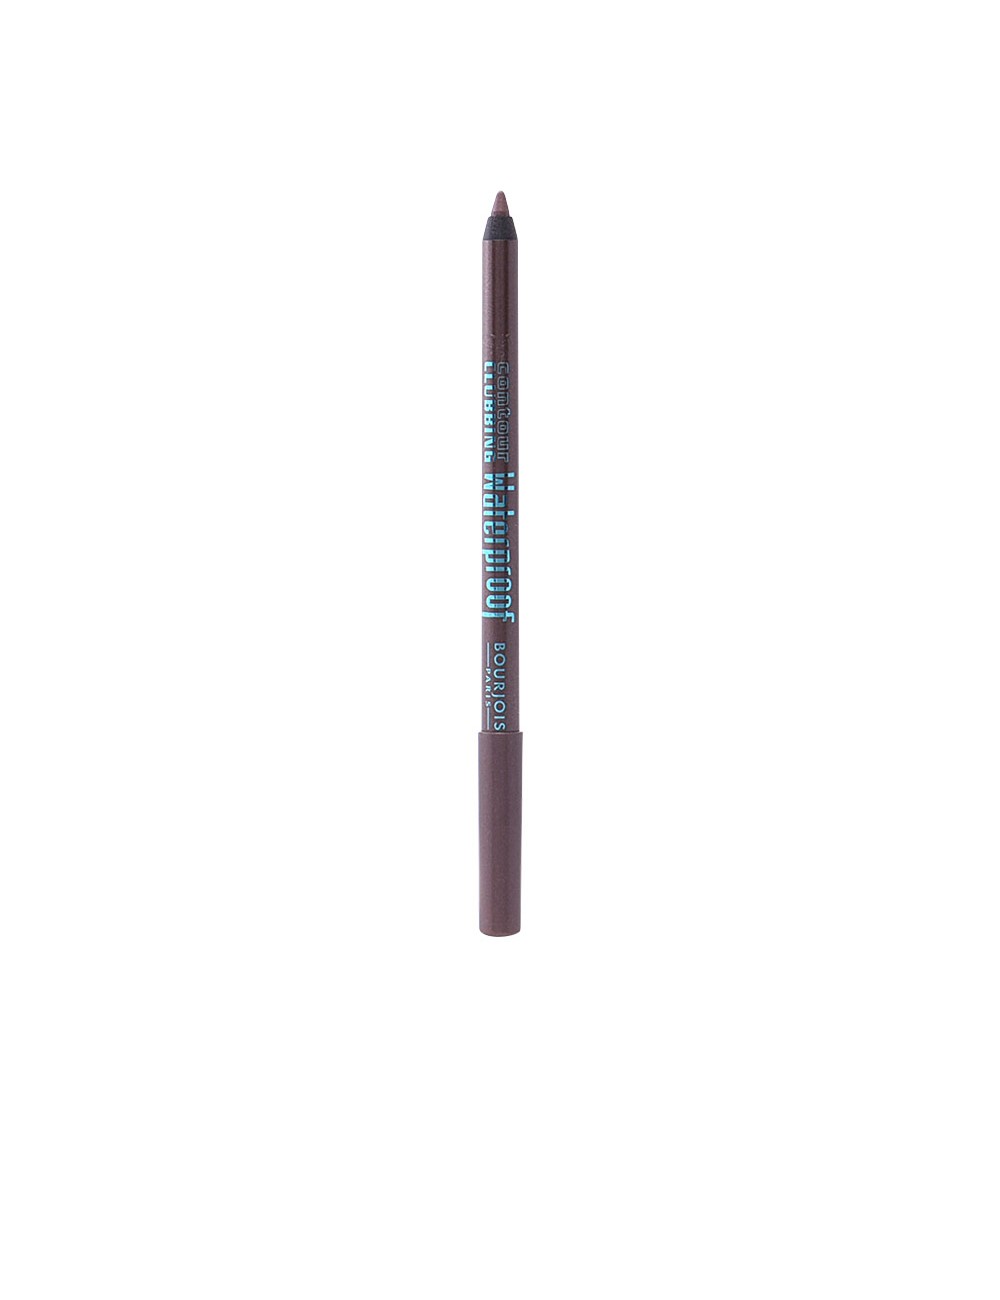 CONTOUR CLUBBING eyeliner waterproof 057-up and brown 1,2gr